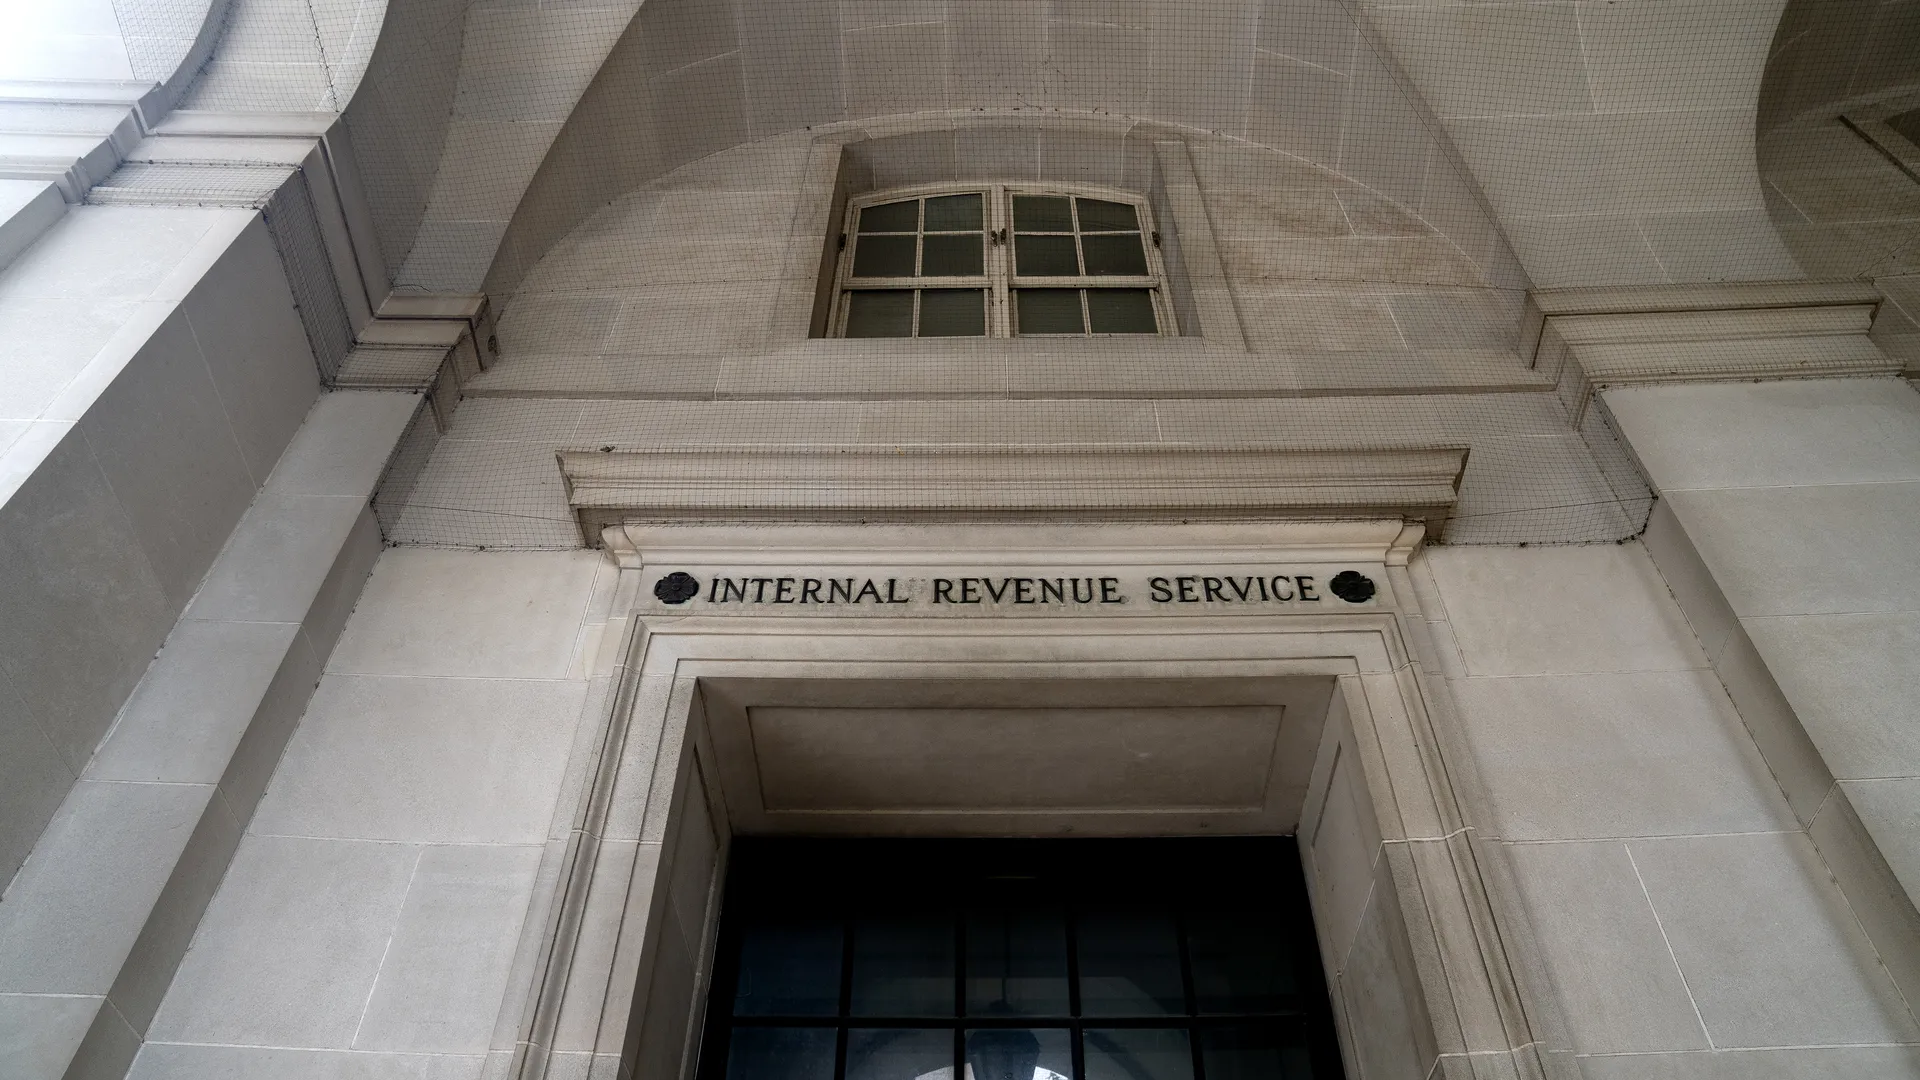 IRS Faces 500,000 Unresolved Identity Theft Cases, Watchdog Reports